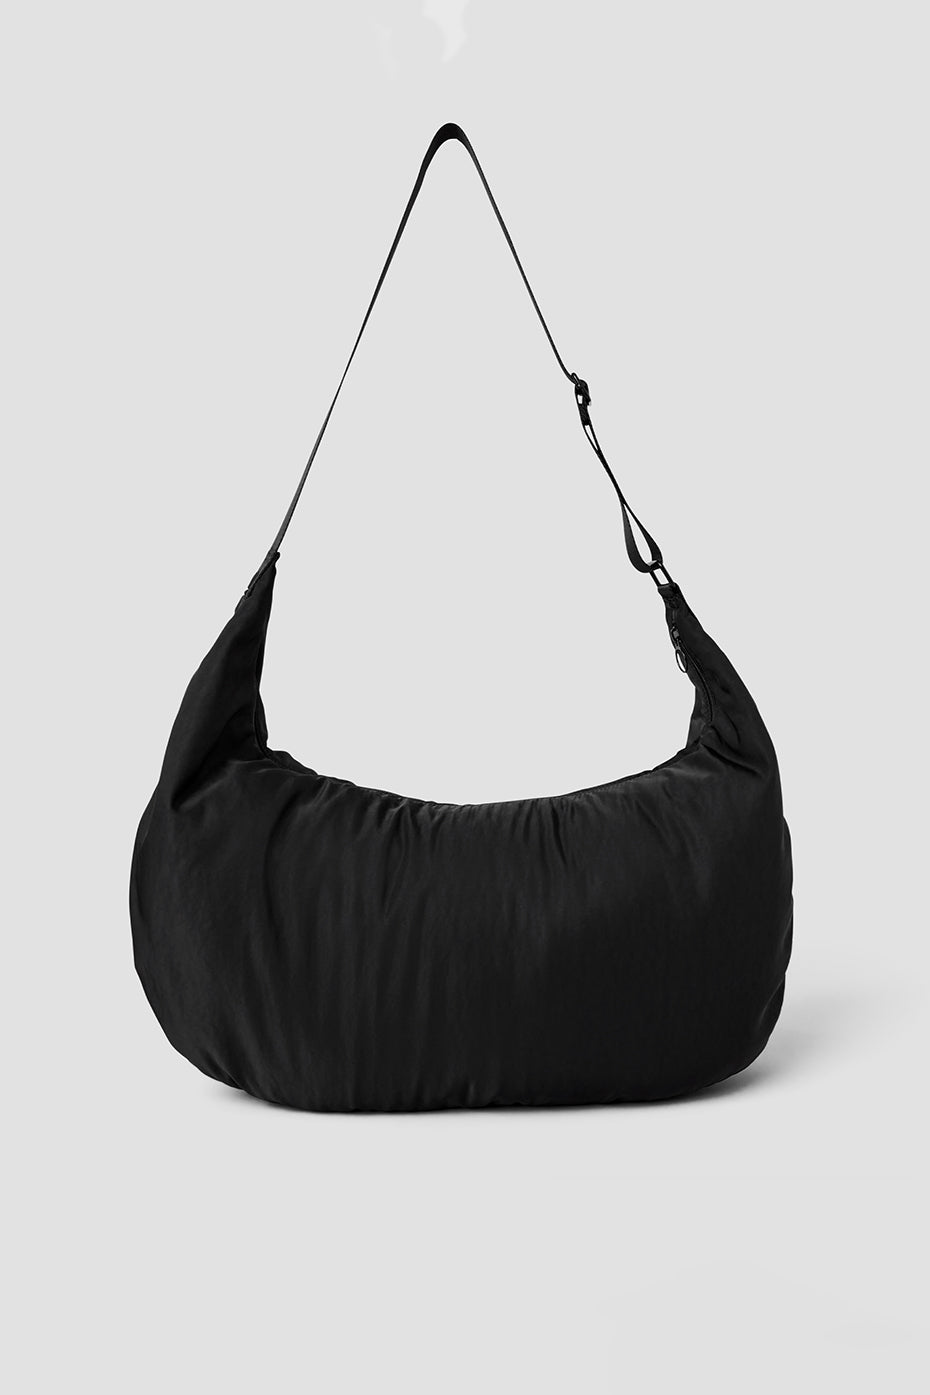 Stow Backpack in Black/Silver by Alo Yoga